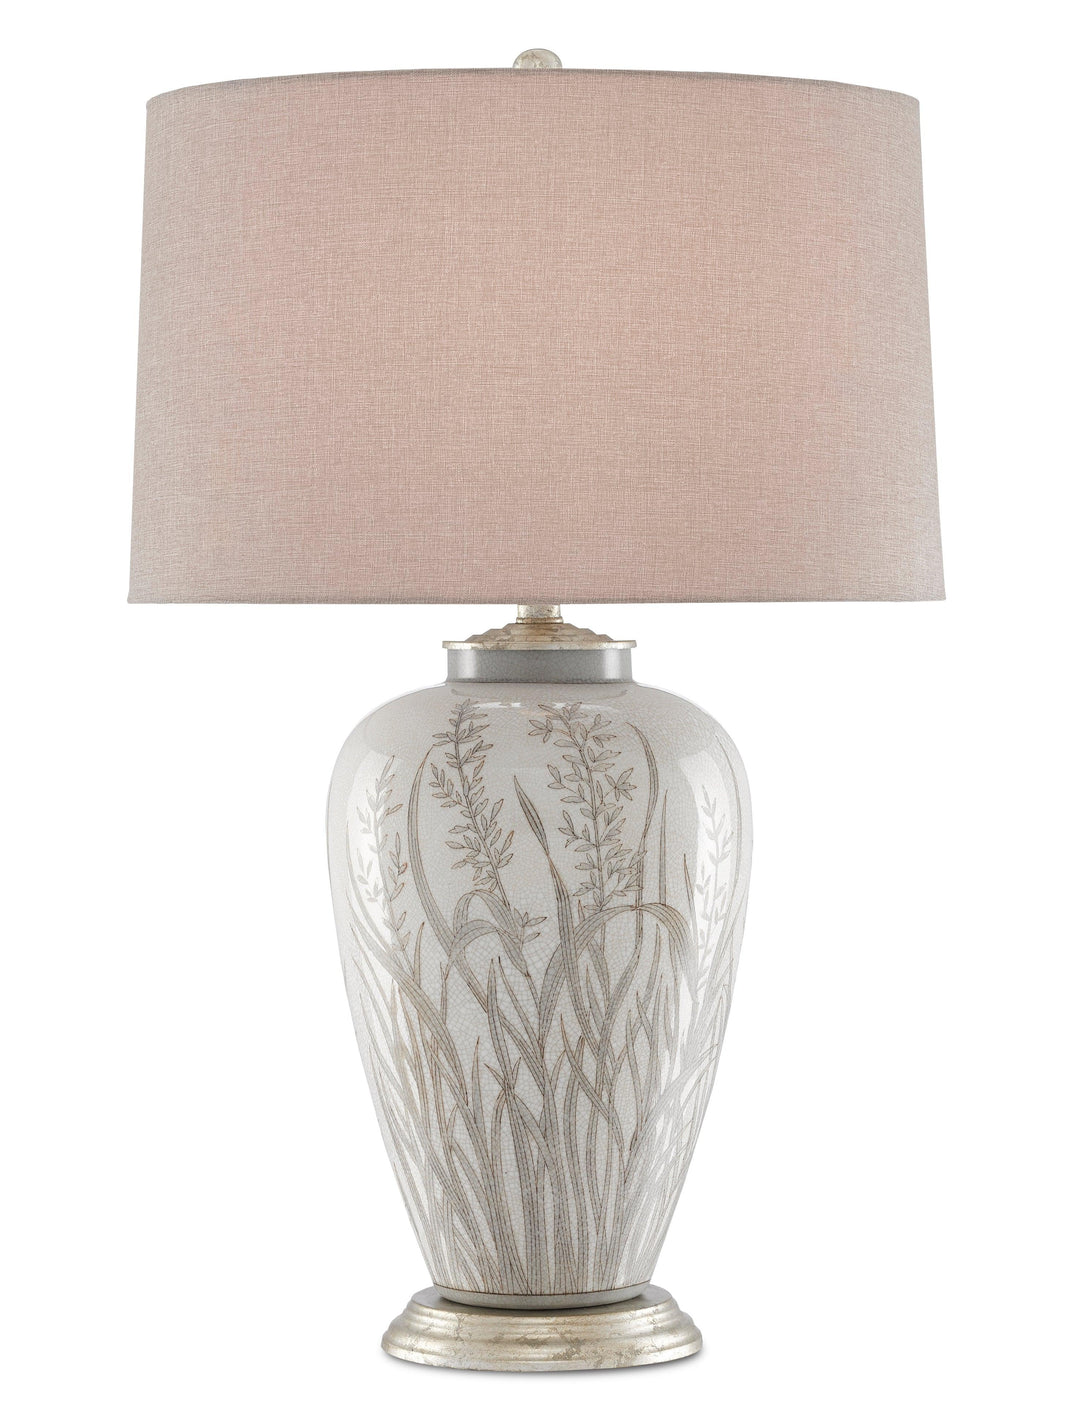 Peppergrass Table Lamp - Casey & Company